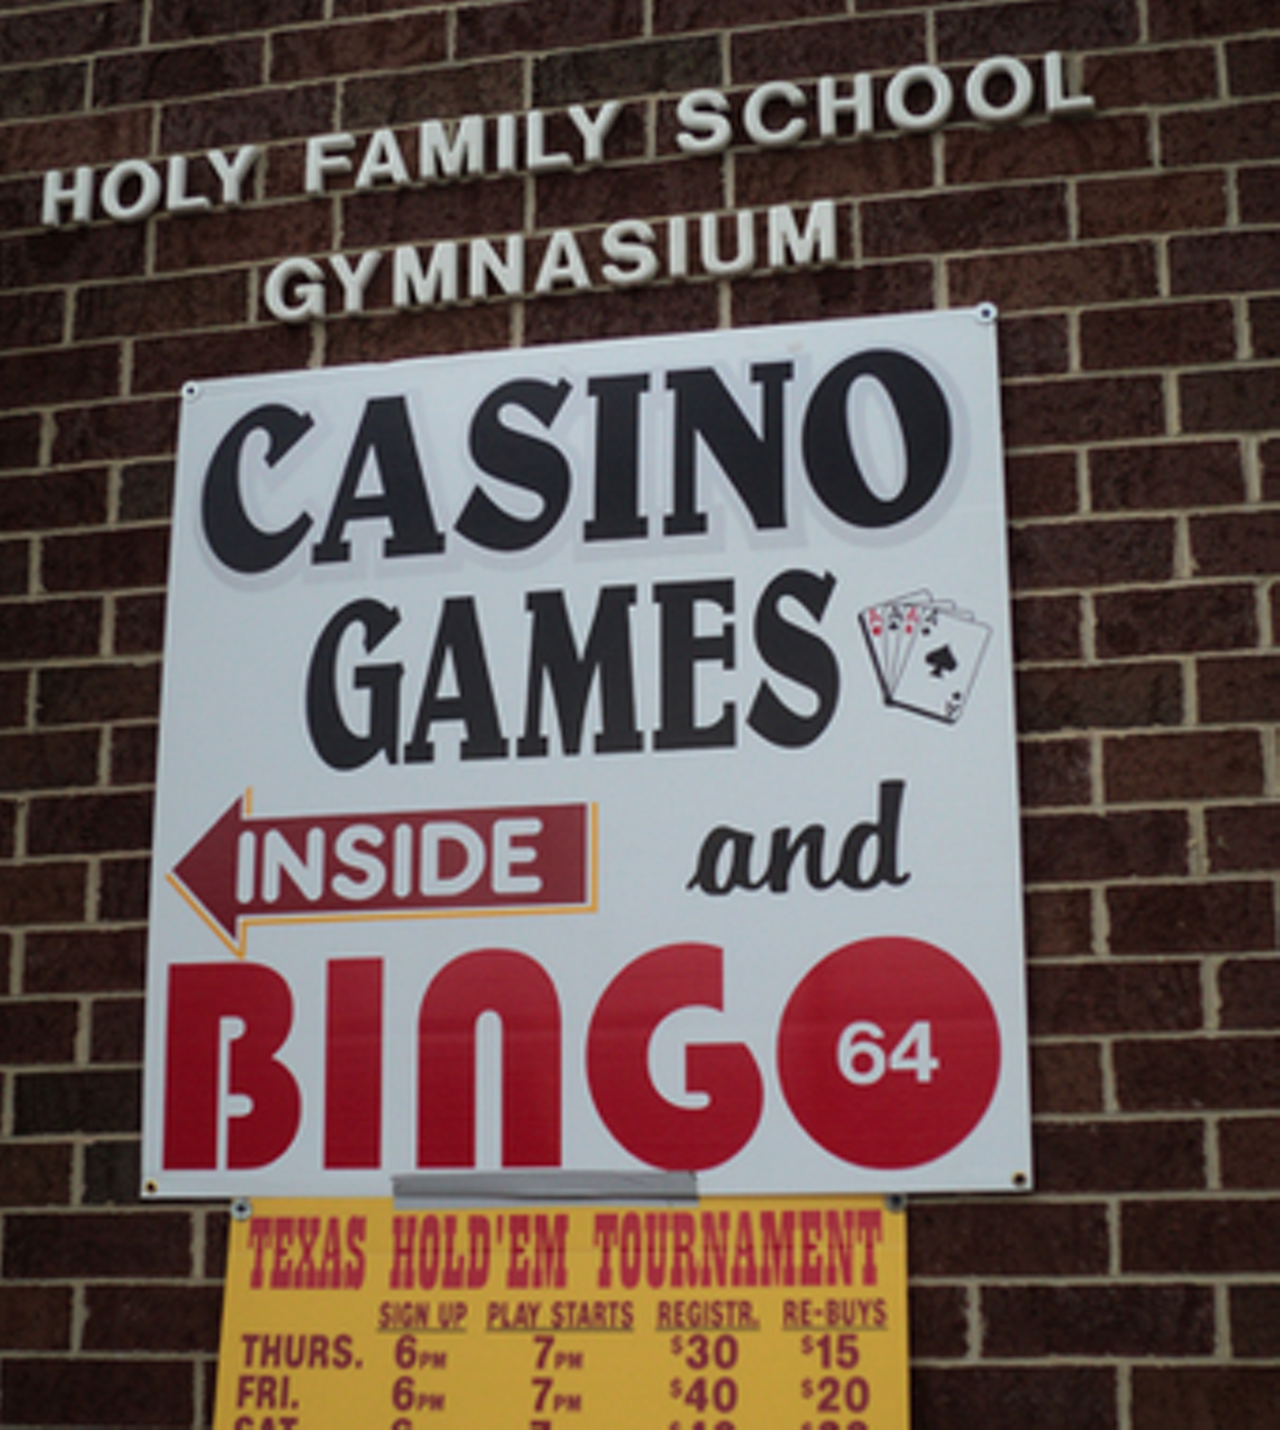 Hit up the last day of the 10th annual Holy Family Parish Festival. Pay a visit to the wine and beer garden and participate in such frivolities as bingo (not just for the older folk) and Texas Hold ‘Em and a casino. It’s air conditioned, there’s a polka band and dinner at 1, and it’s free. Grab a bite to eat, a brew, and try your hand at some of those old-fashioned games. What more could you ask for on a Sunday afternoon? Head out to the Holy Family Church in Parma and visit www.holyfamilyfestivalparma.webs.com for more info. (Dietz)